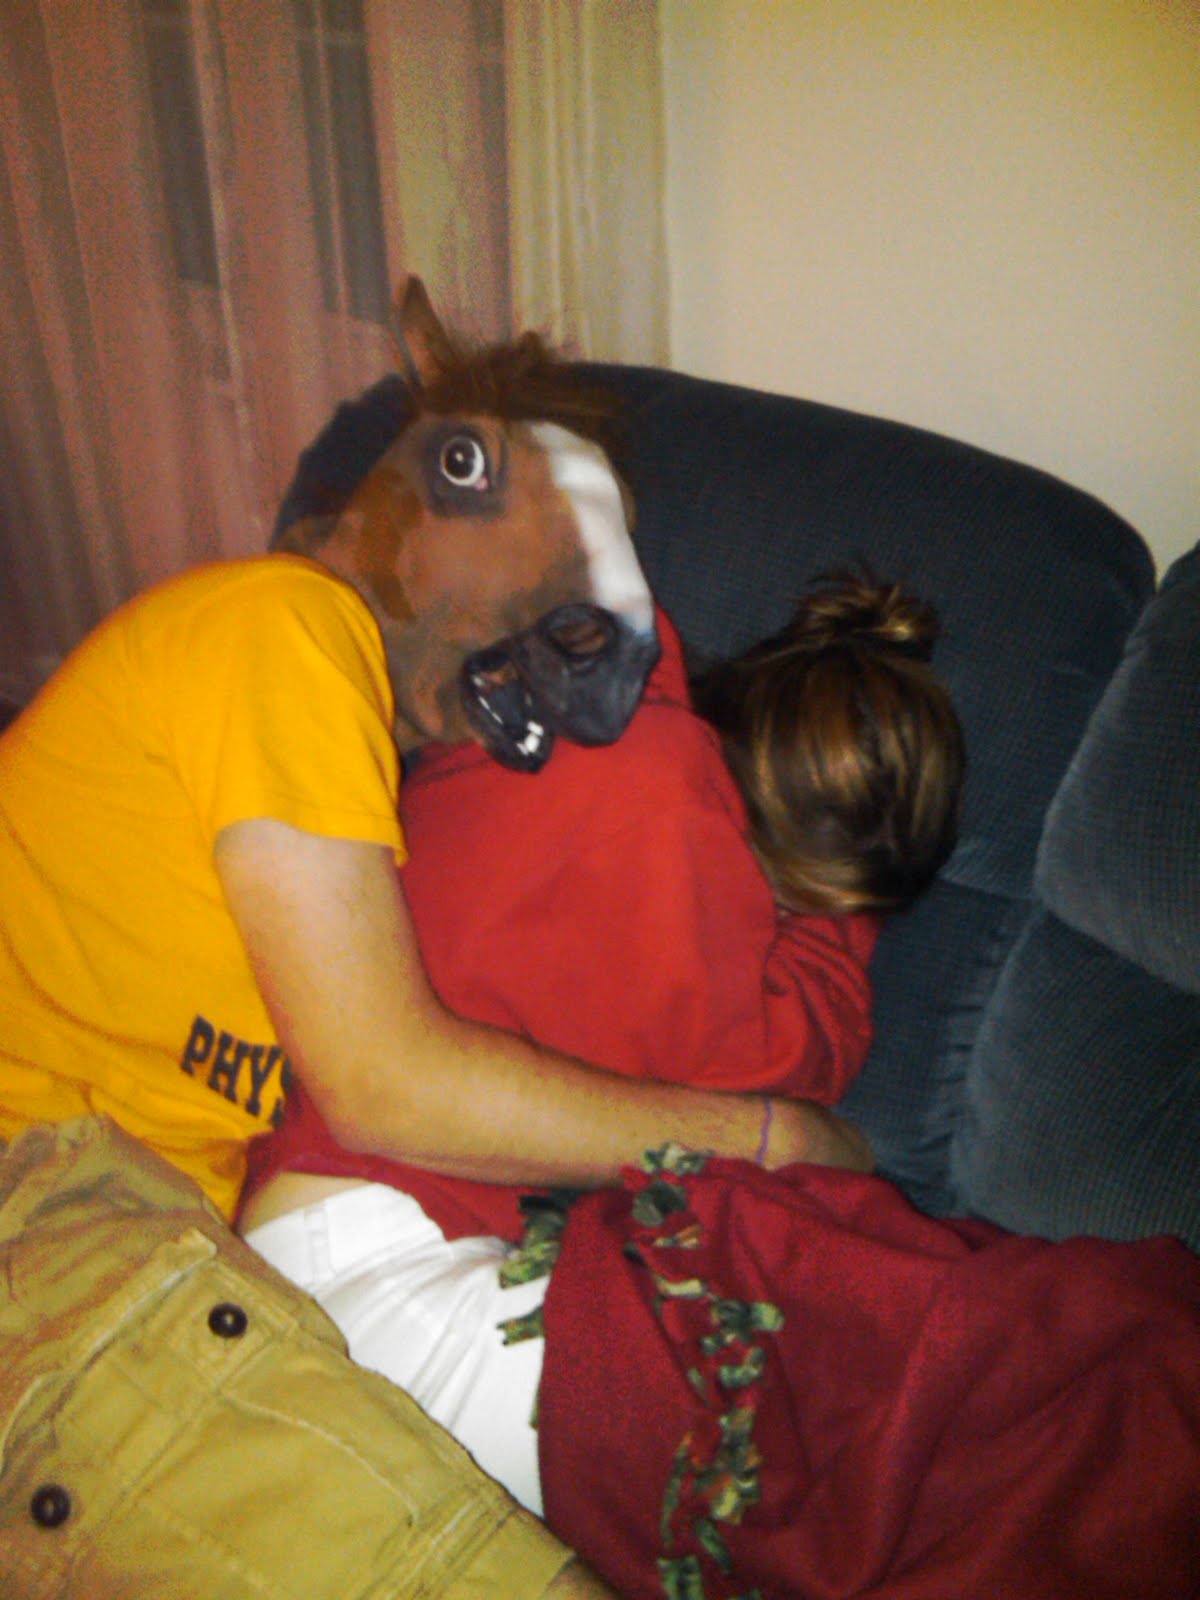 Horse Head in the Bed